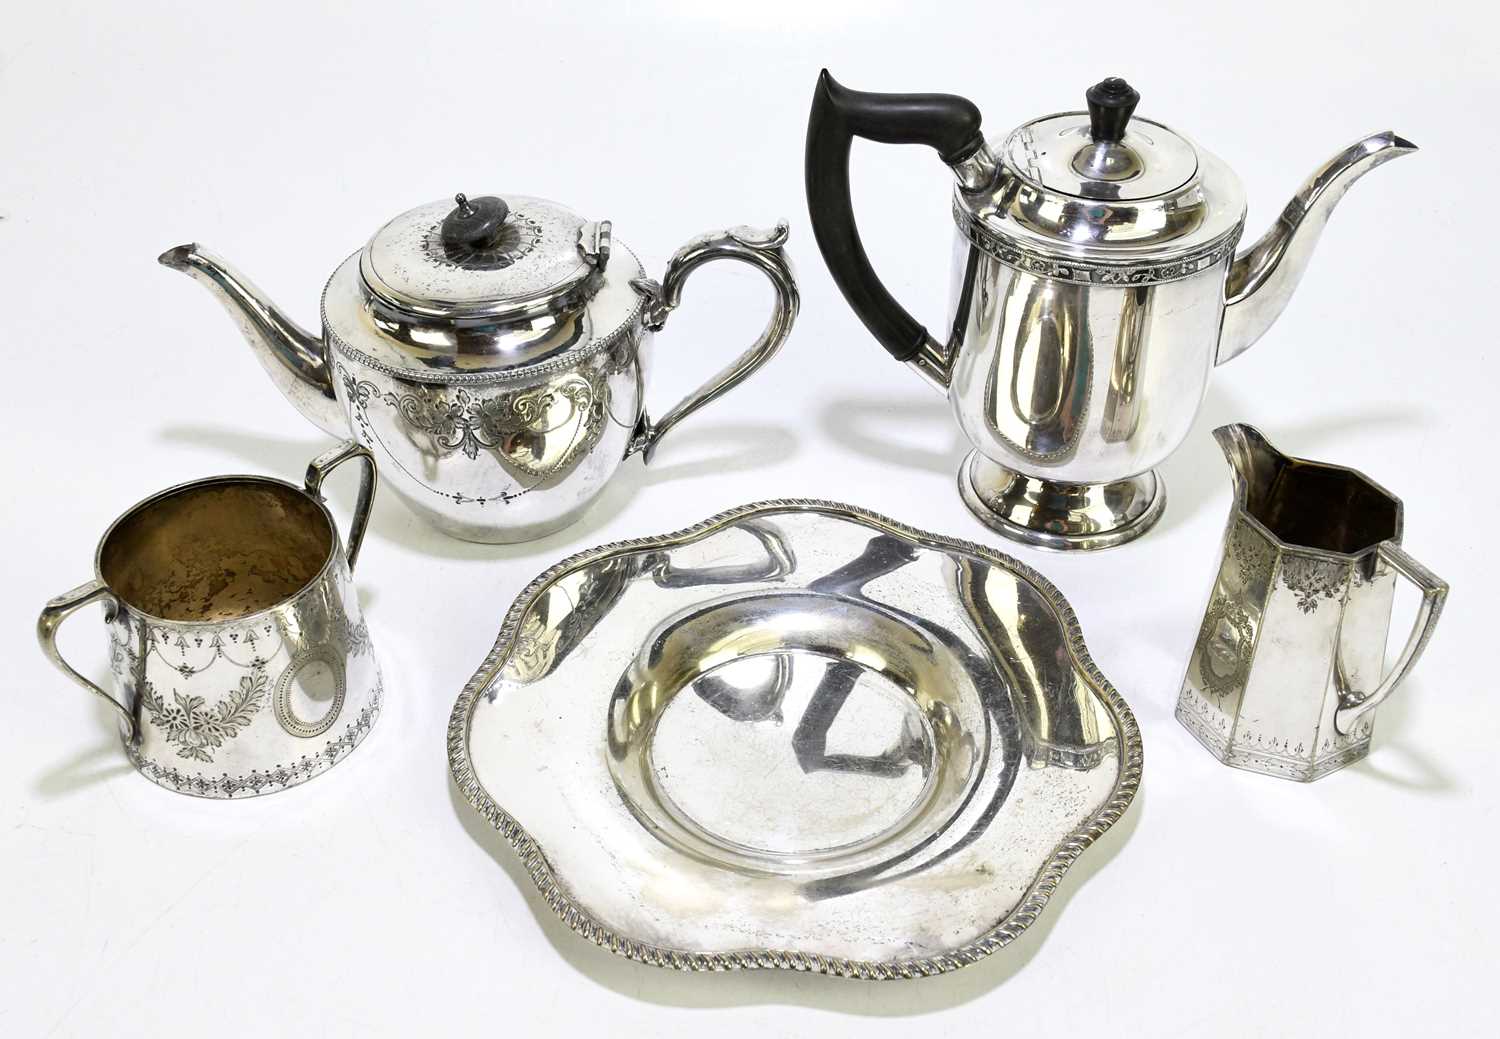 Two silver plated teapots with a sugar bowl, a cream jug and a dish.